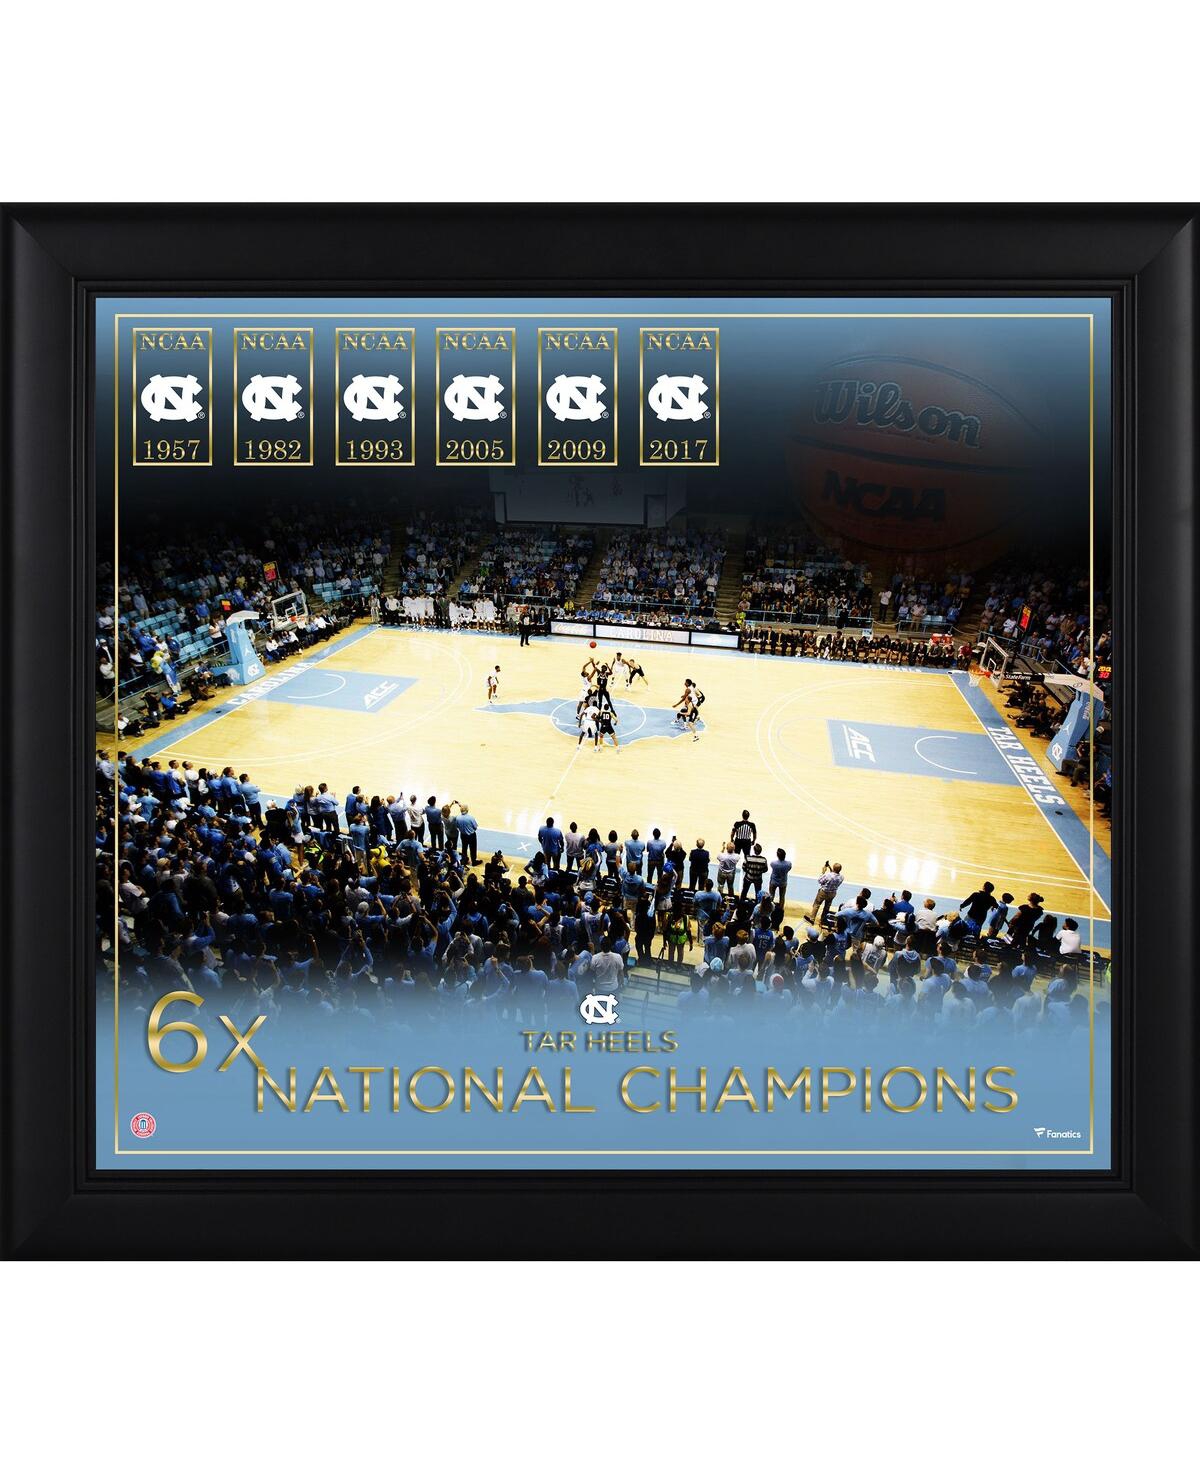 Fanatics Authentic North Carolina Tar Heels Framed 15" X 17" Basketball Championship Count Collage In Multi